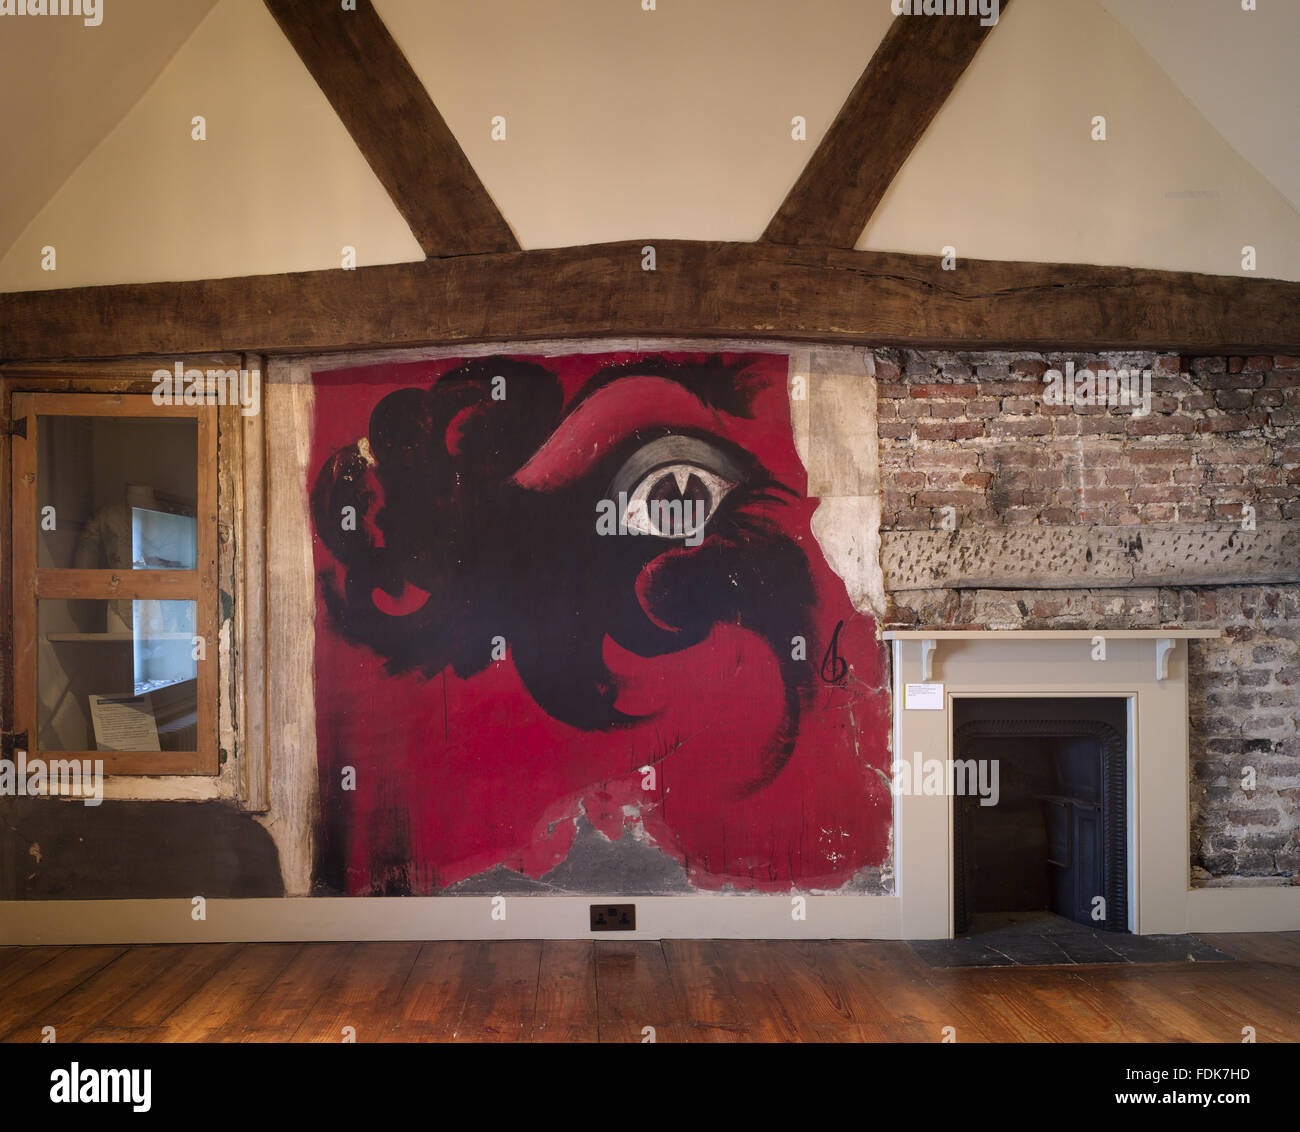 The Exhibition Room at Sutton House, Hackney, London. The 'Squatters Eye' graffiti wall painting dates from the period when the house was occupied by squatters in the 1980s. Stock Photo